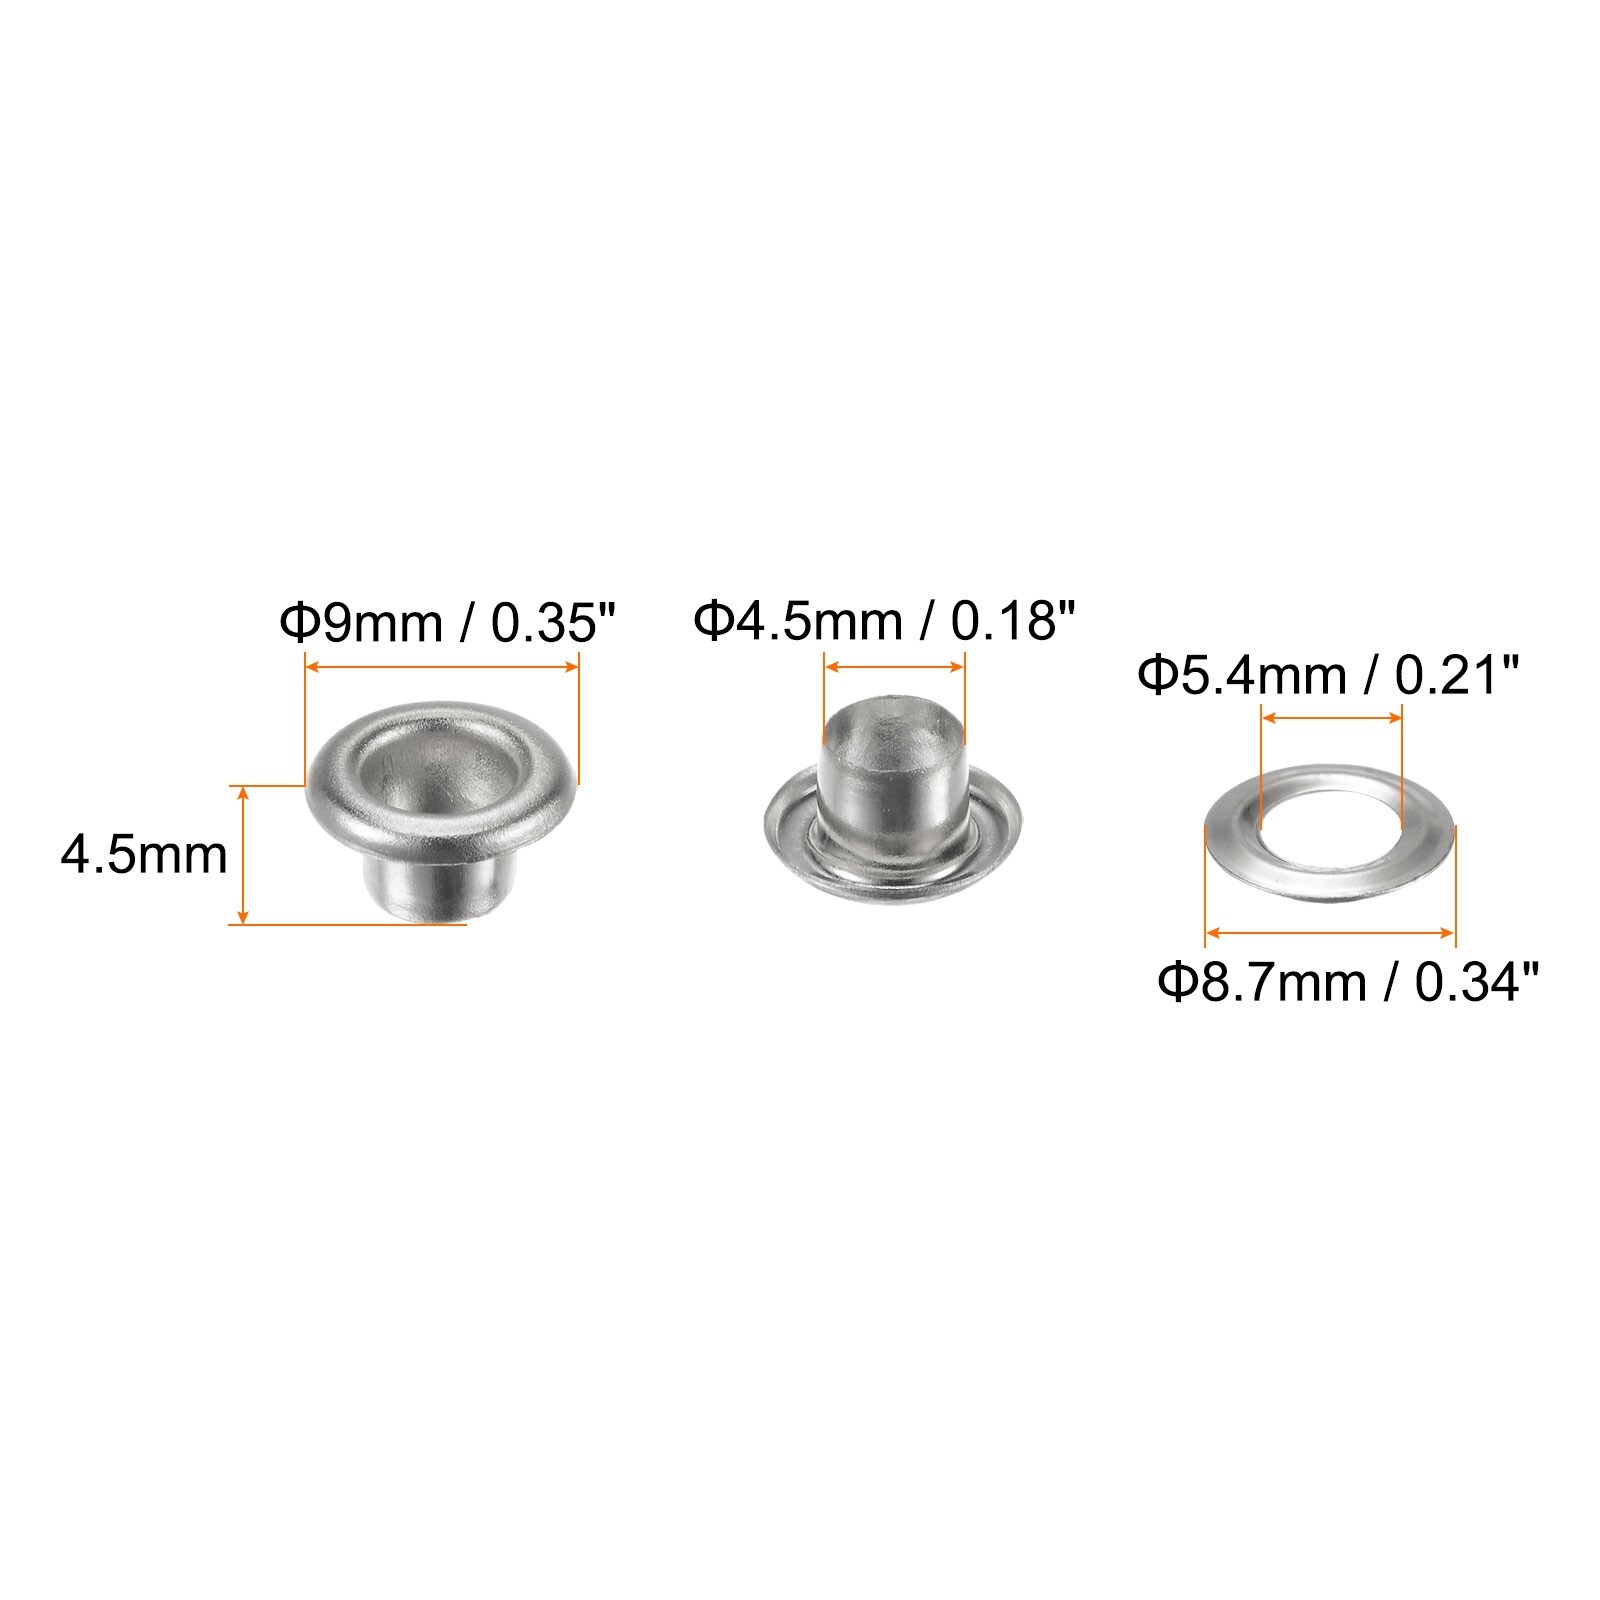 NOGIS 10 Pieces Grommet and 10 Pieces Washer Grommet Kit Finish